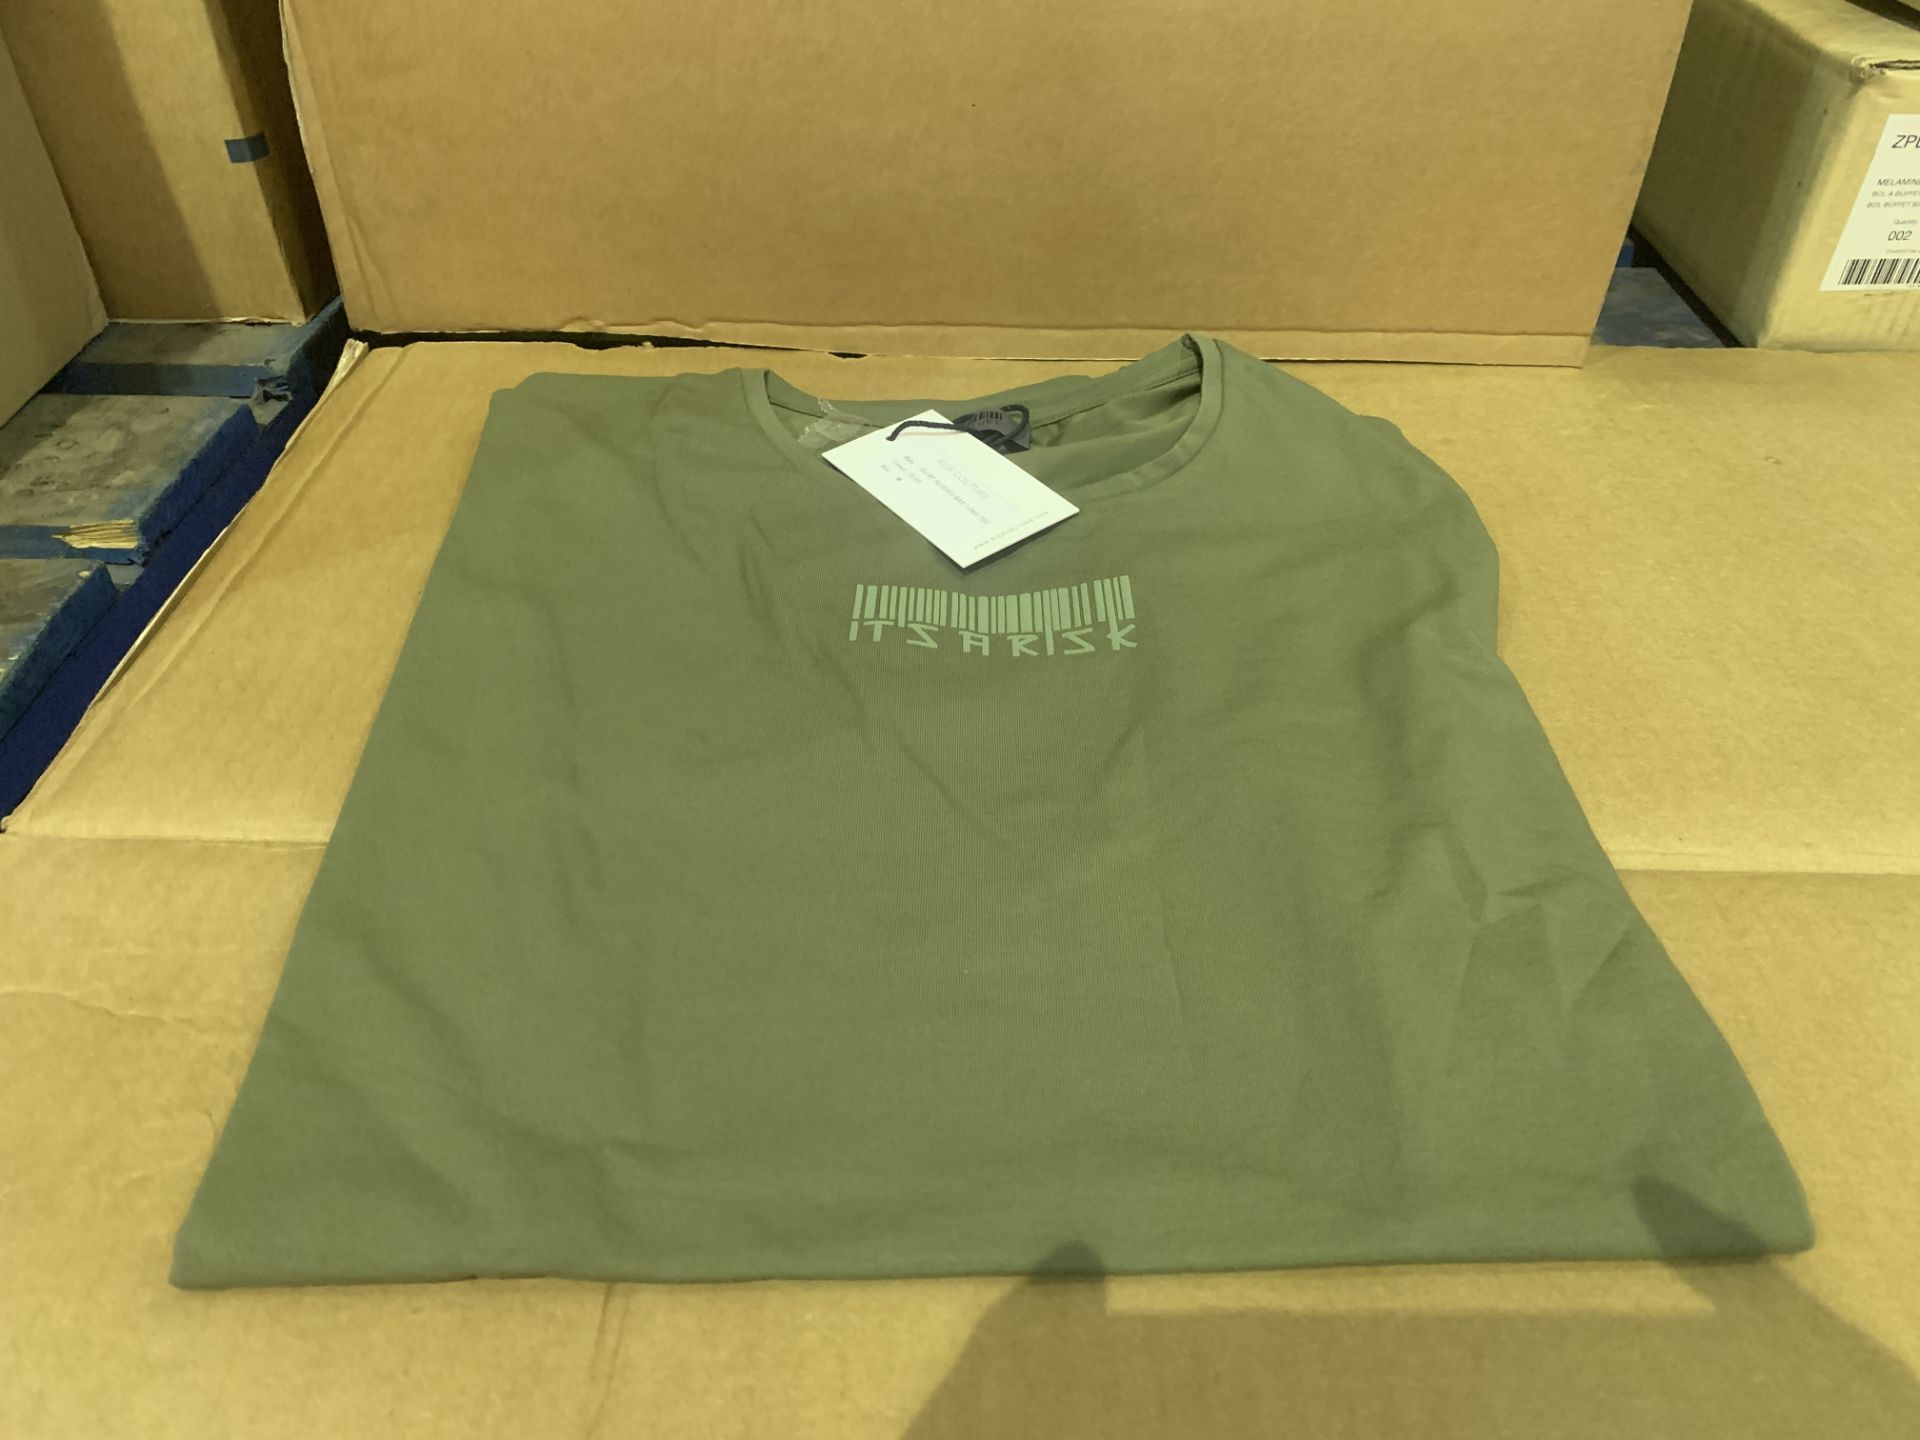 20 X BRAND NEW RISKCOUTURE SHIRT SLEEVED LADDER T SHIRTS KHAKI IN VARIOUS SIZES (189/3)